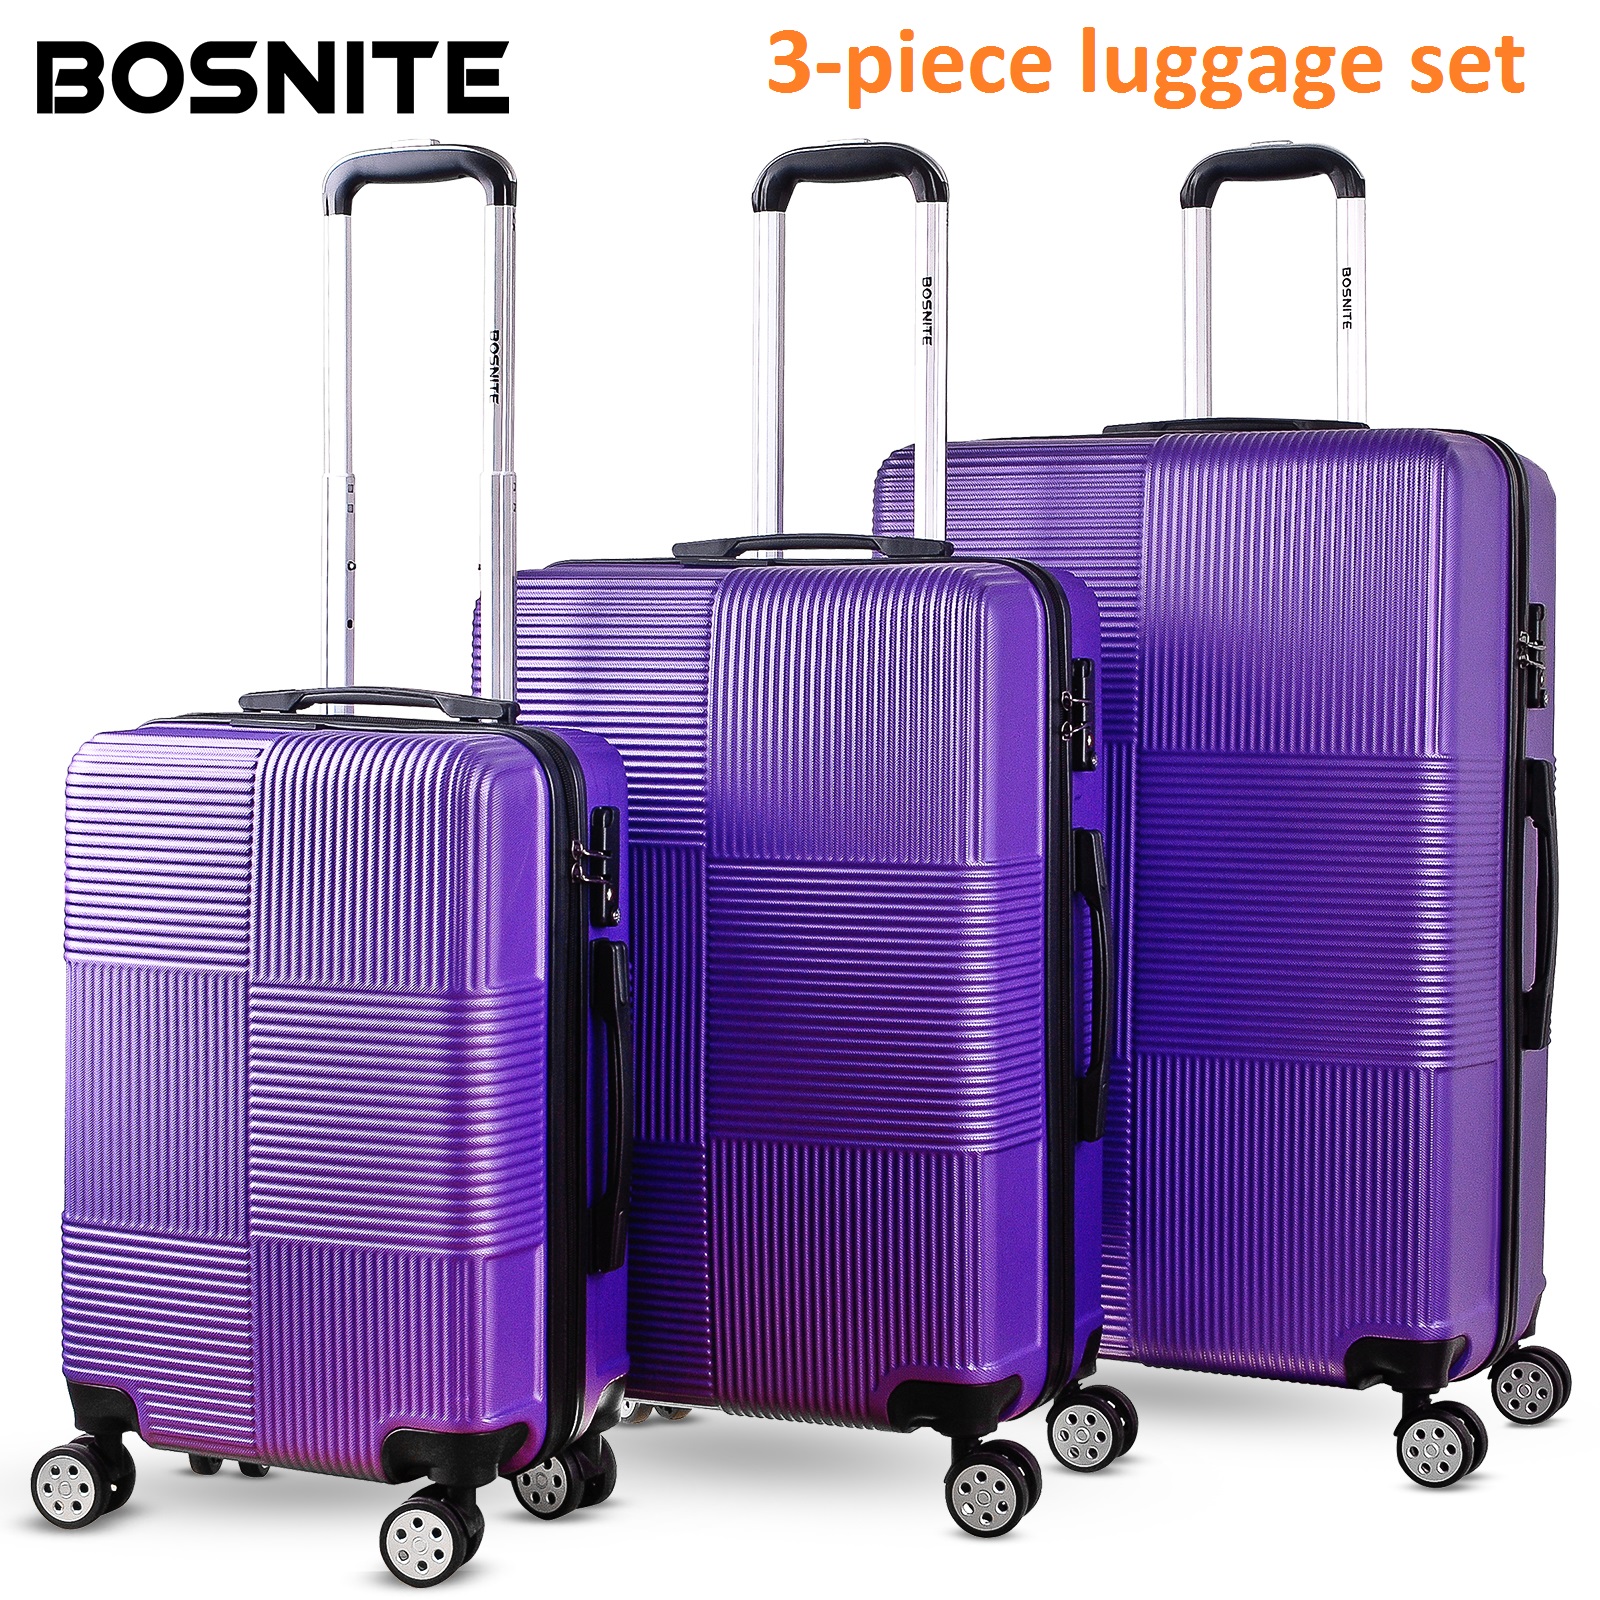 Bargains Online Blog How to Choose the Perfect Luggage Set Online for ...